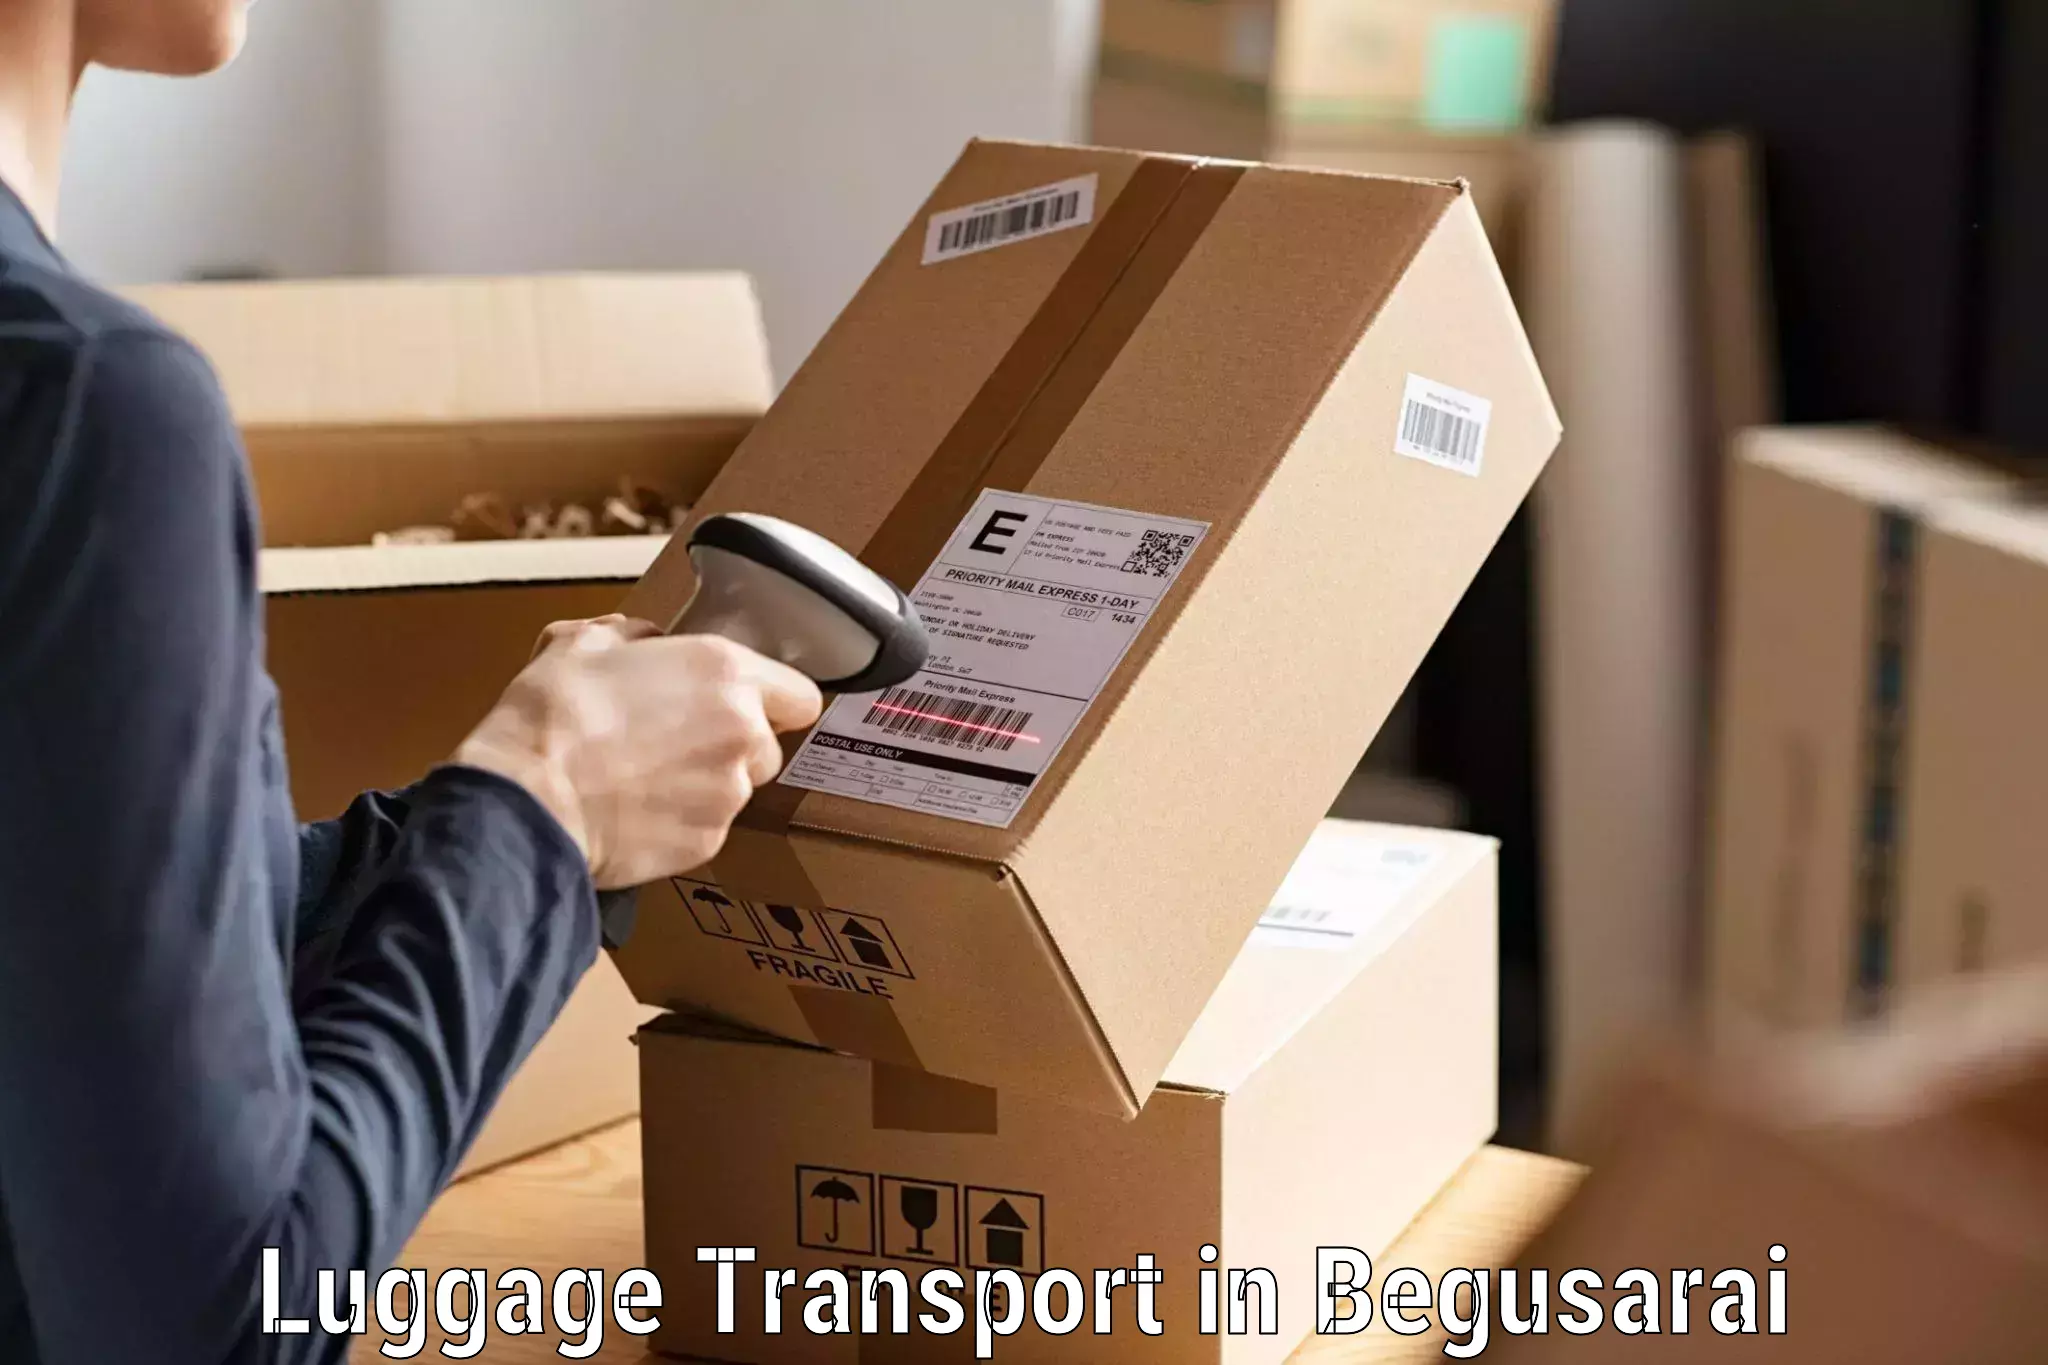 Automated luggage transport in Begusarai